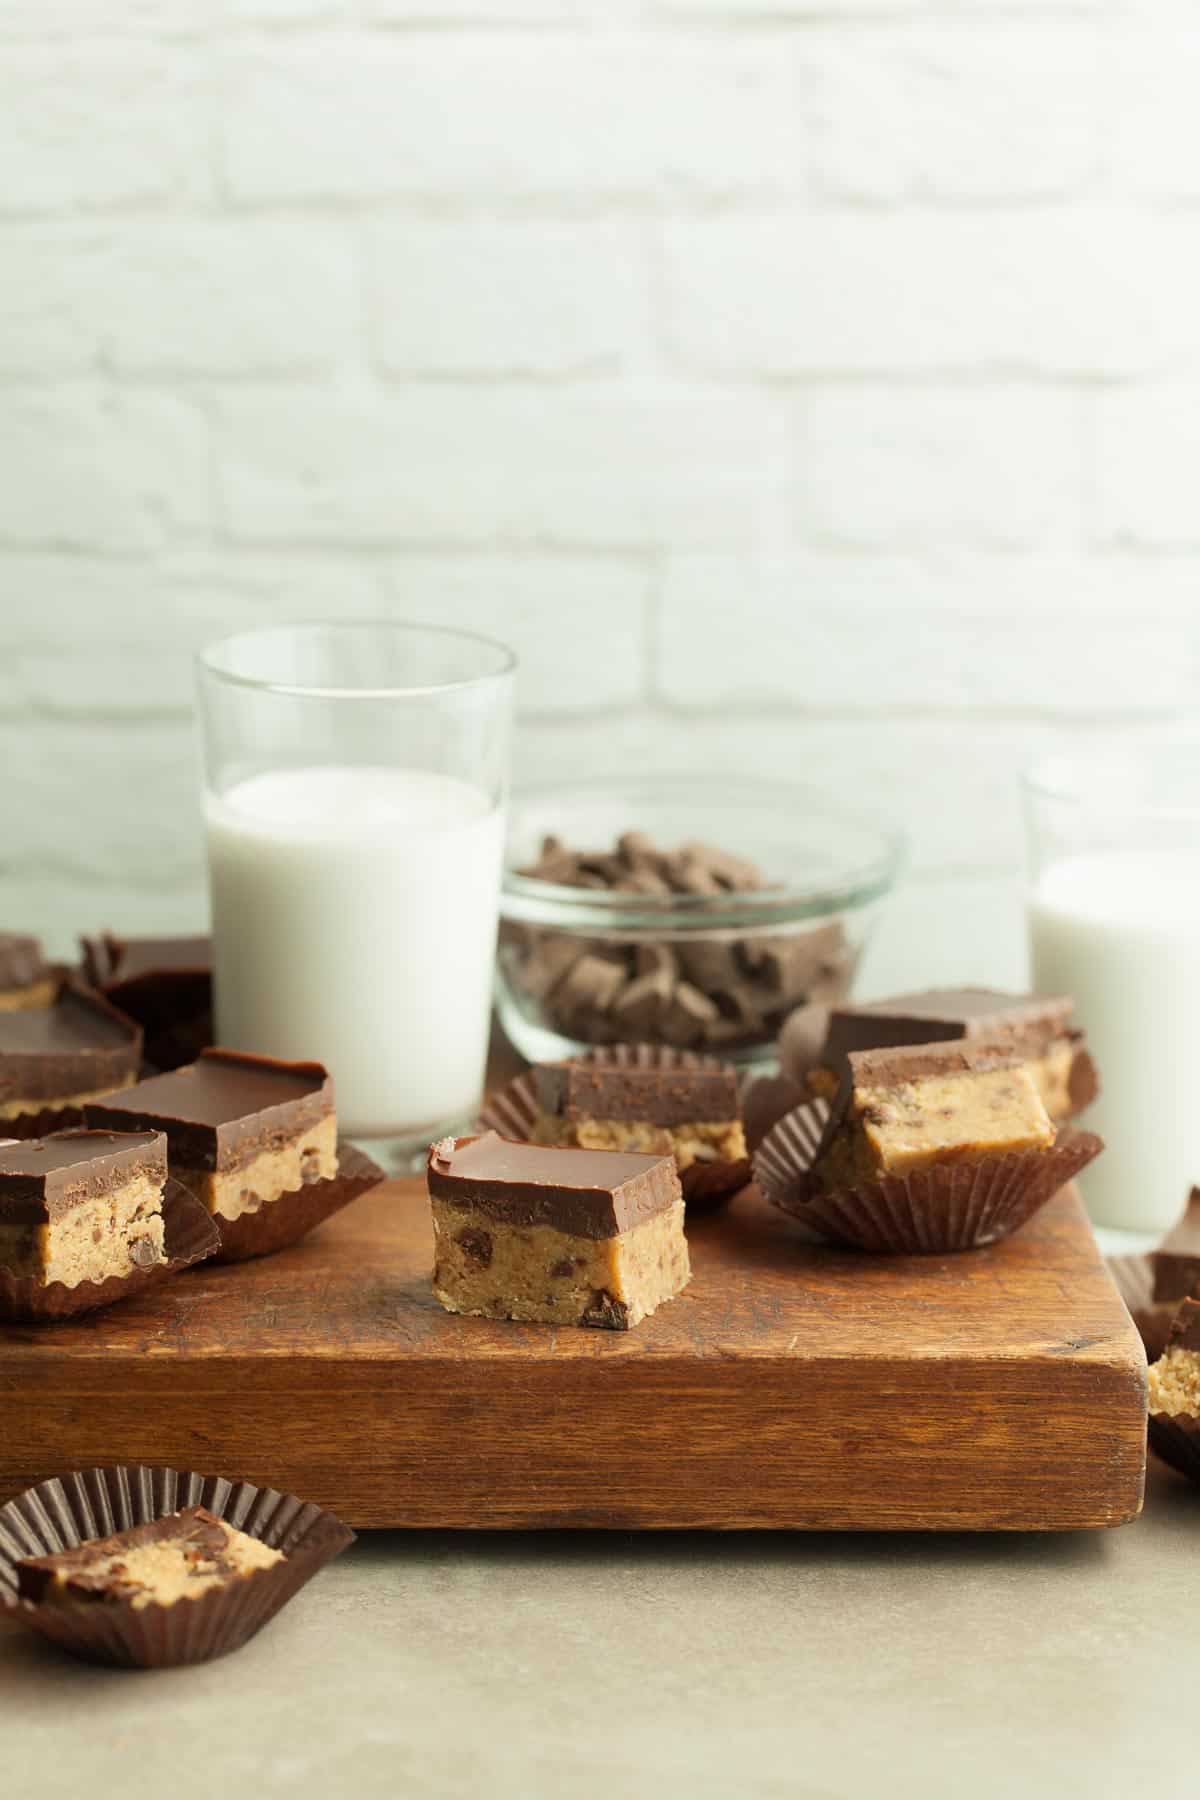 No Bake Cookie Dough Bites with glass of milk